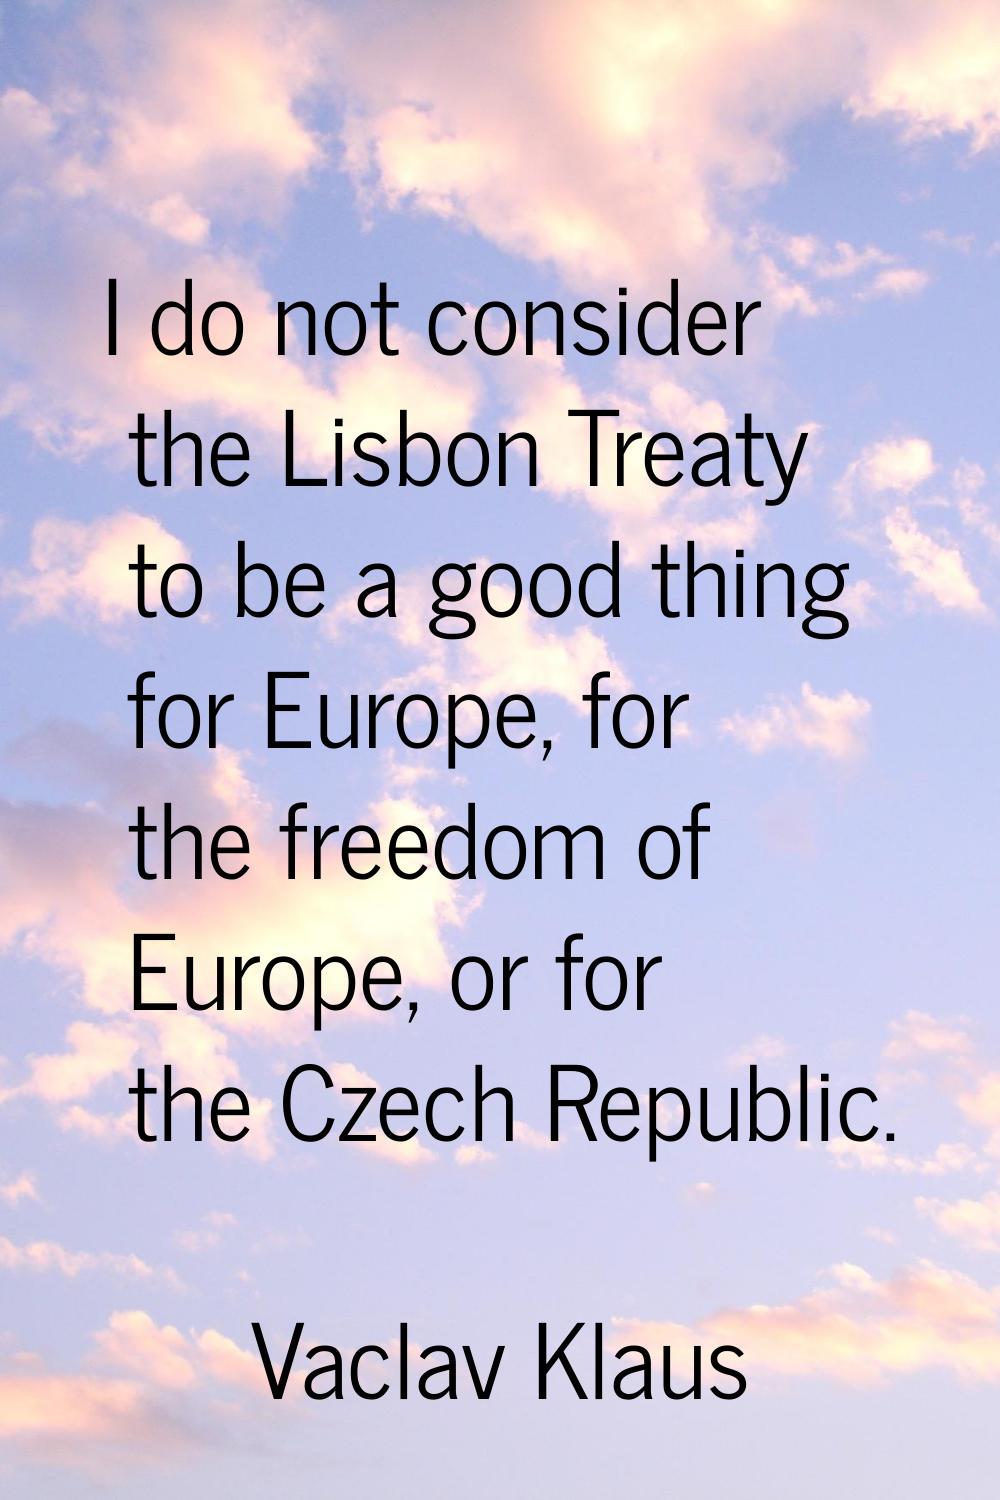 I do not consider the Lisbon Treaty to be a good thing for Europe, for the freedom of Europe, or fo